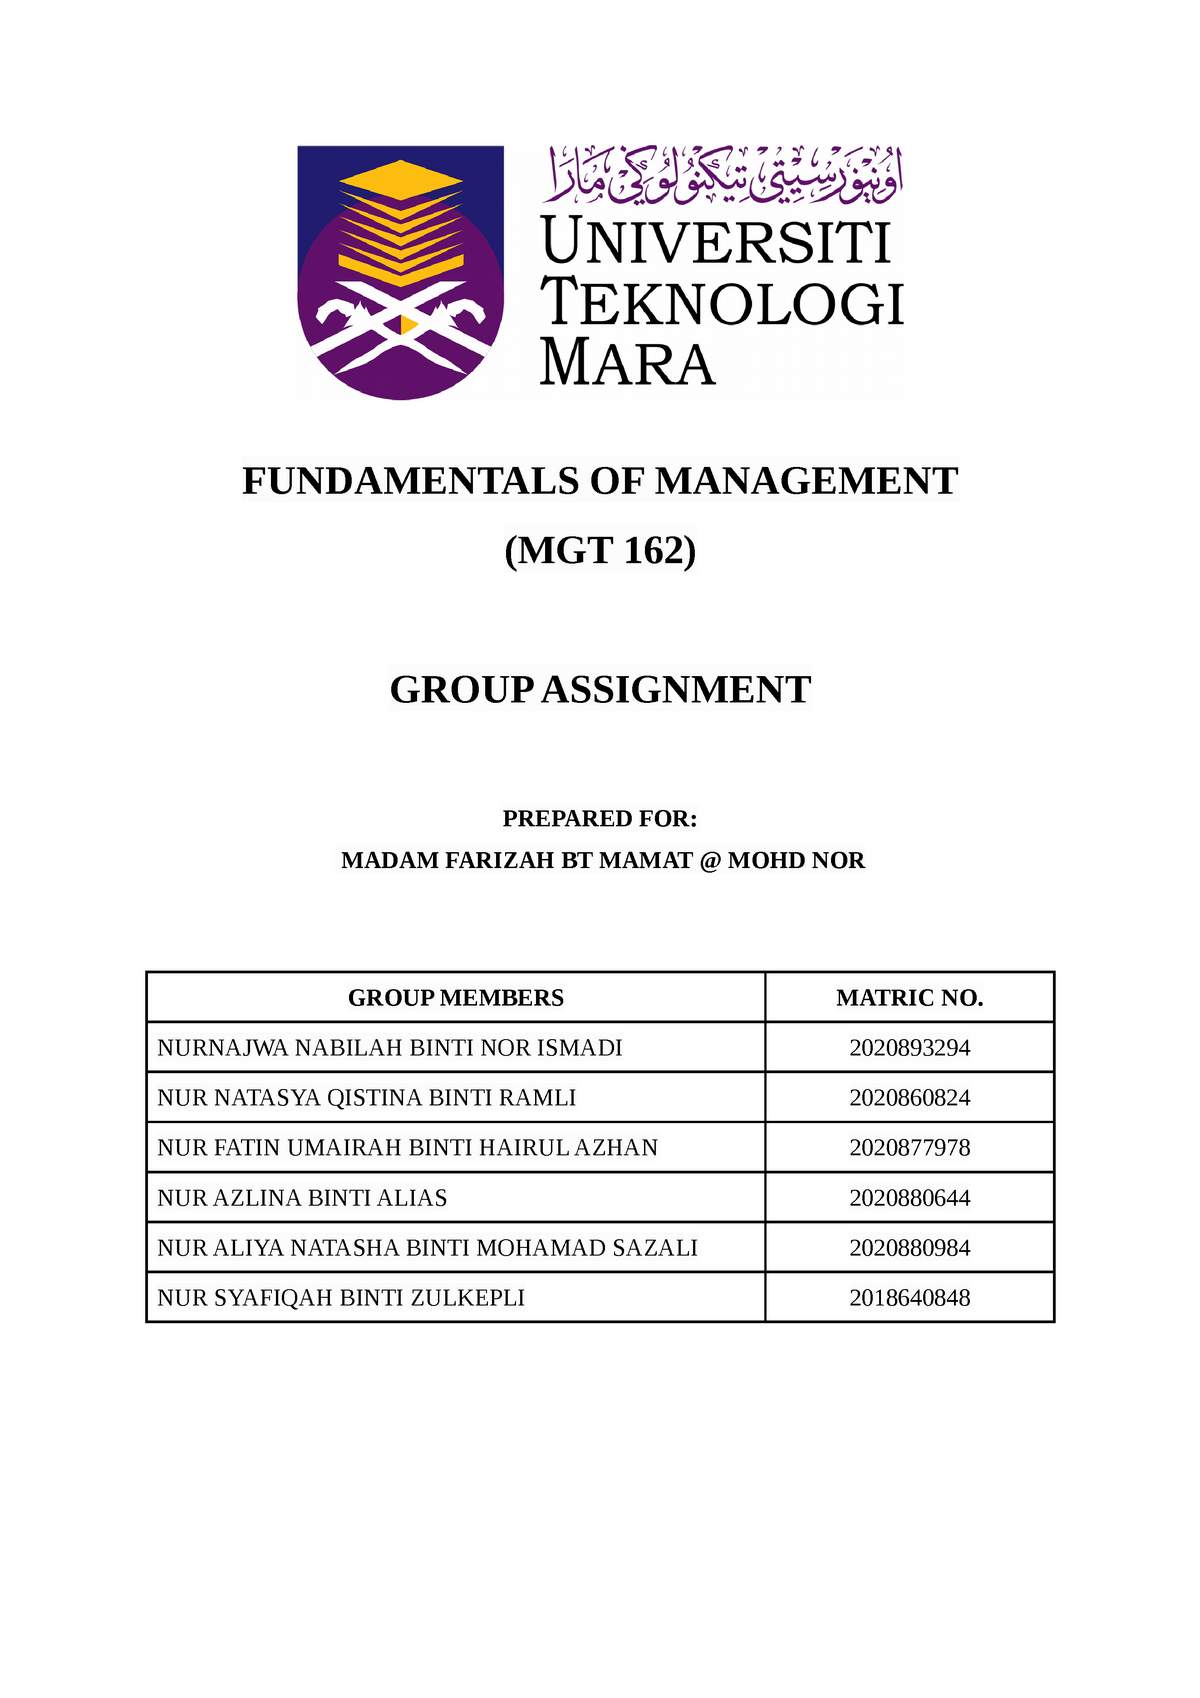 mgt group assignment example